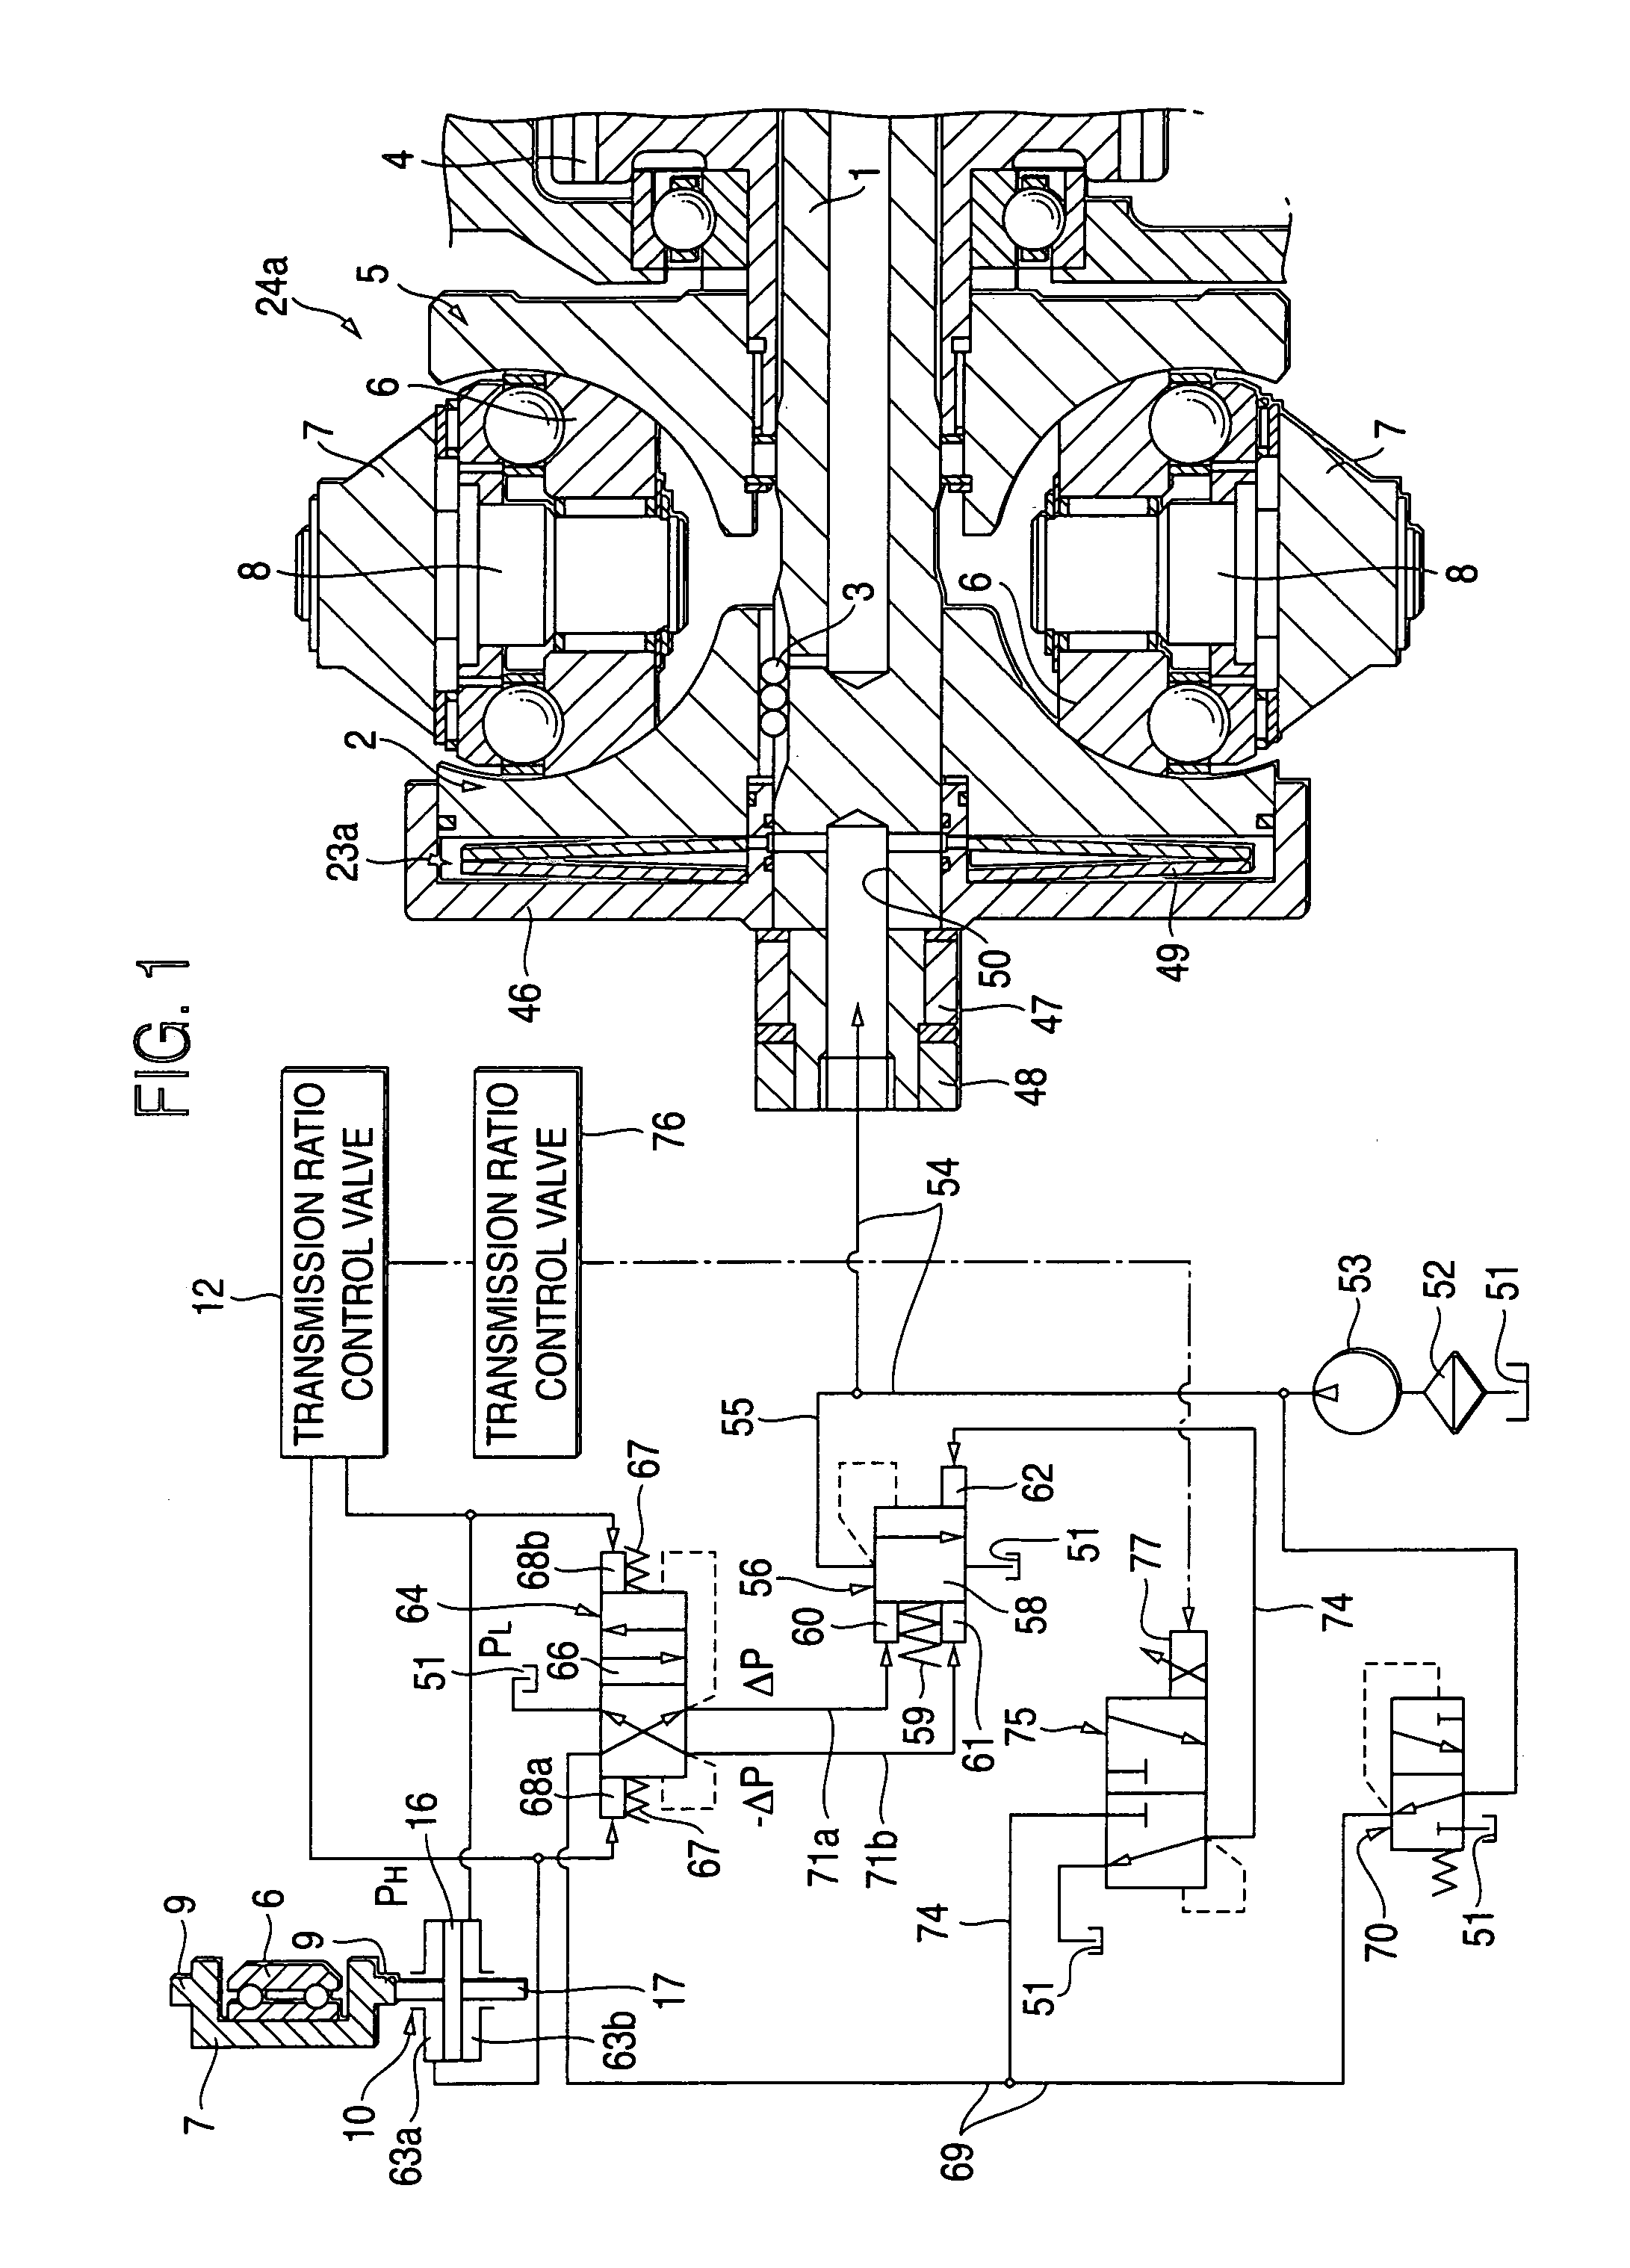 Toroidal-type continuously variable transmission